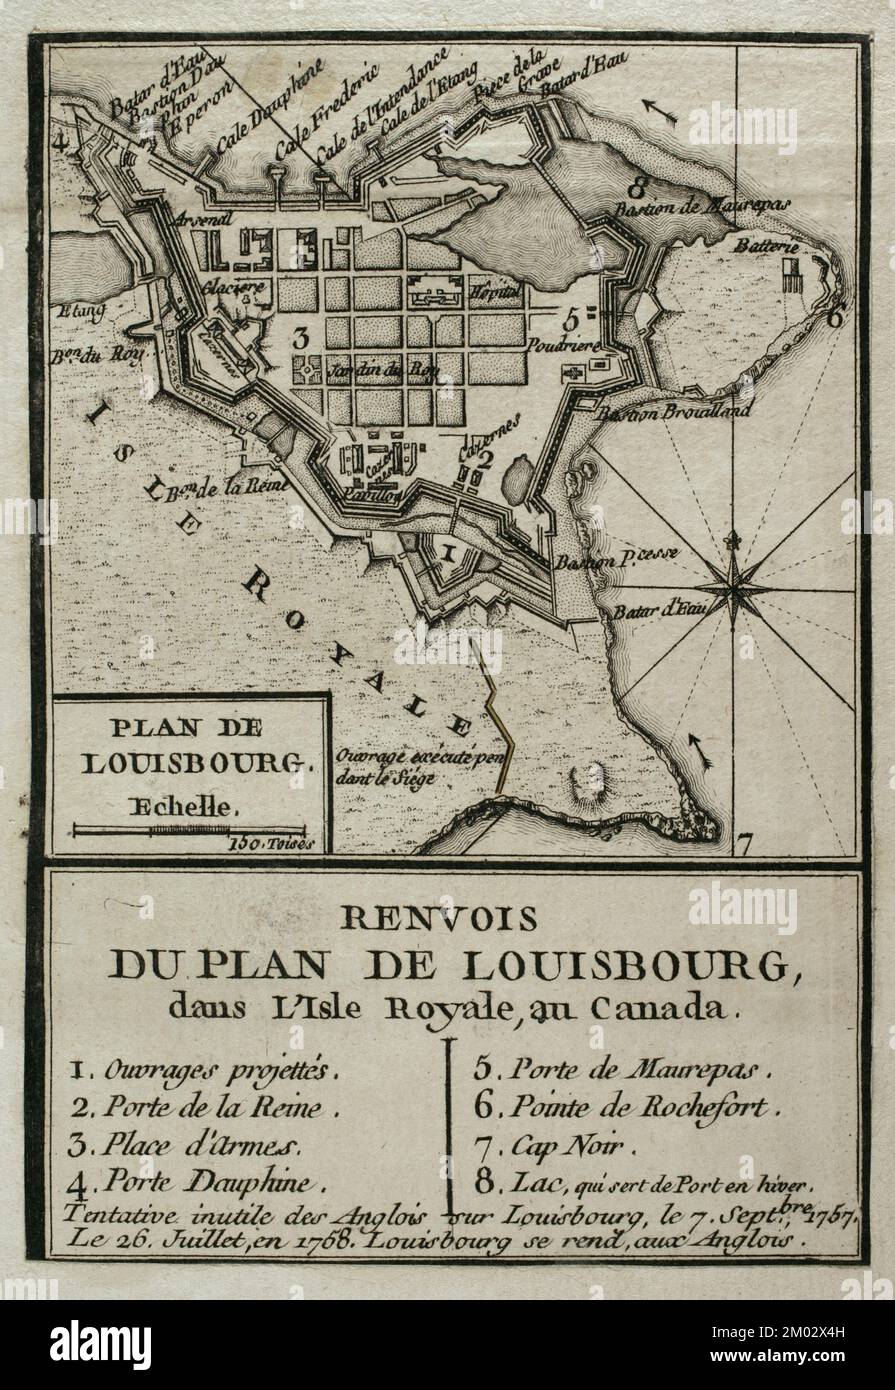 Map of Louisbourg, Canada. Nova Scotia. It depicts the successful siege of the great French fortress by the British in 1758 who finally took Louisbourg on July 26, 1758. Published in 1765 by the cartographer Jean de Beaurain (1696-1771) as an illustration for his Great Map of Germany, with the events that took place during the Seven Years' War. War from 1755 to 1763. French edition, 1765. Engraving. Military Historical Library of Barcelona (Biblioteca Histórico Militar de Barcelona). Catalonia. Spain. Stock Photo